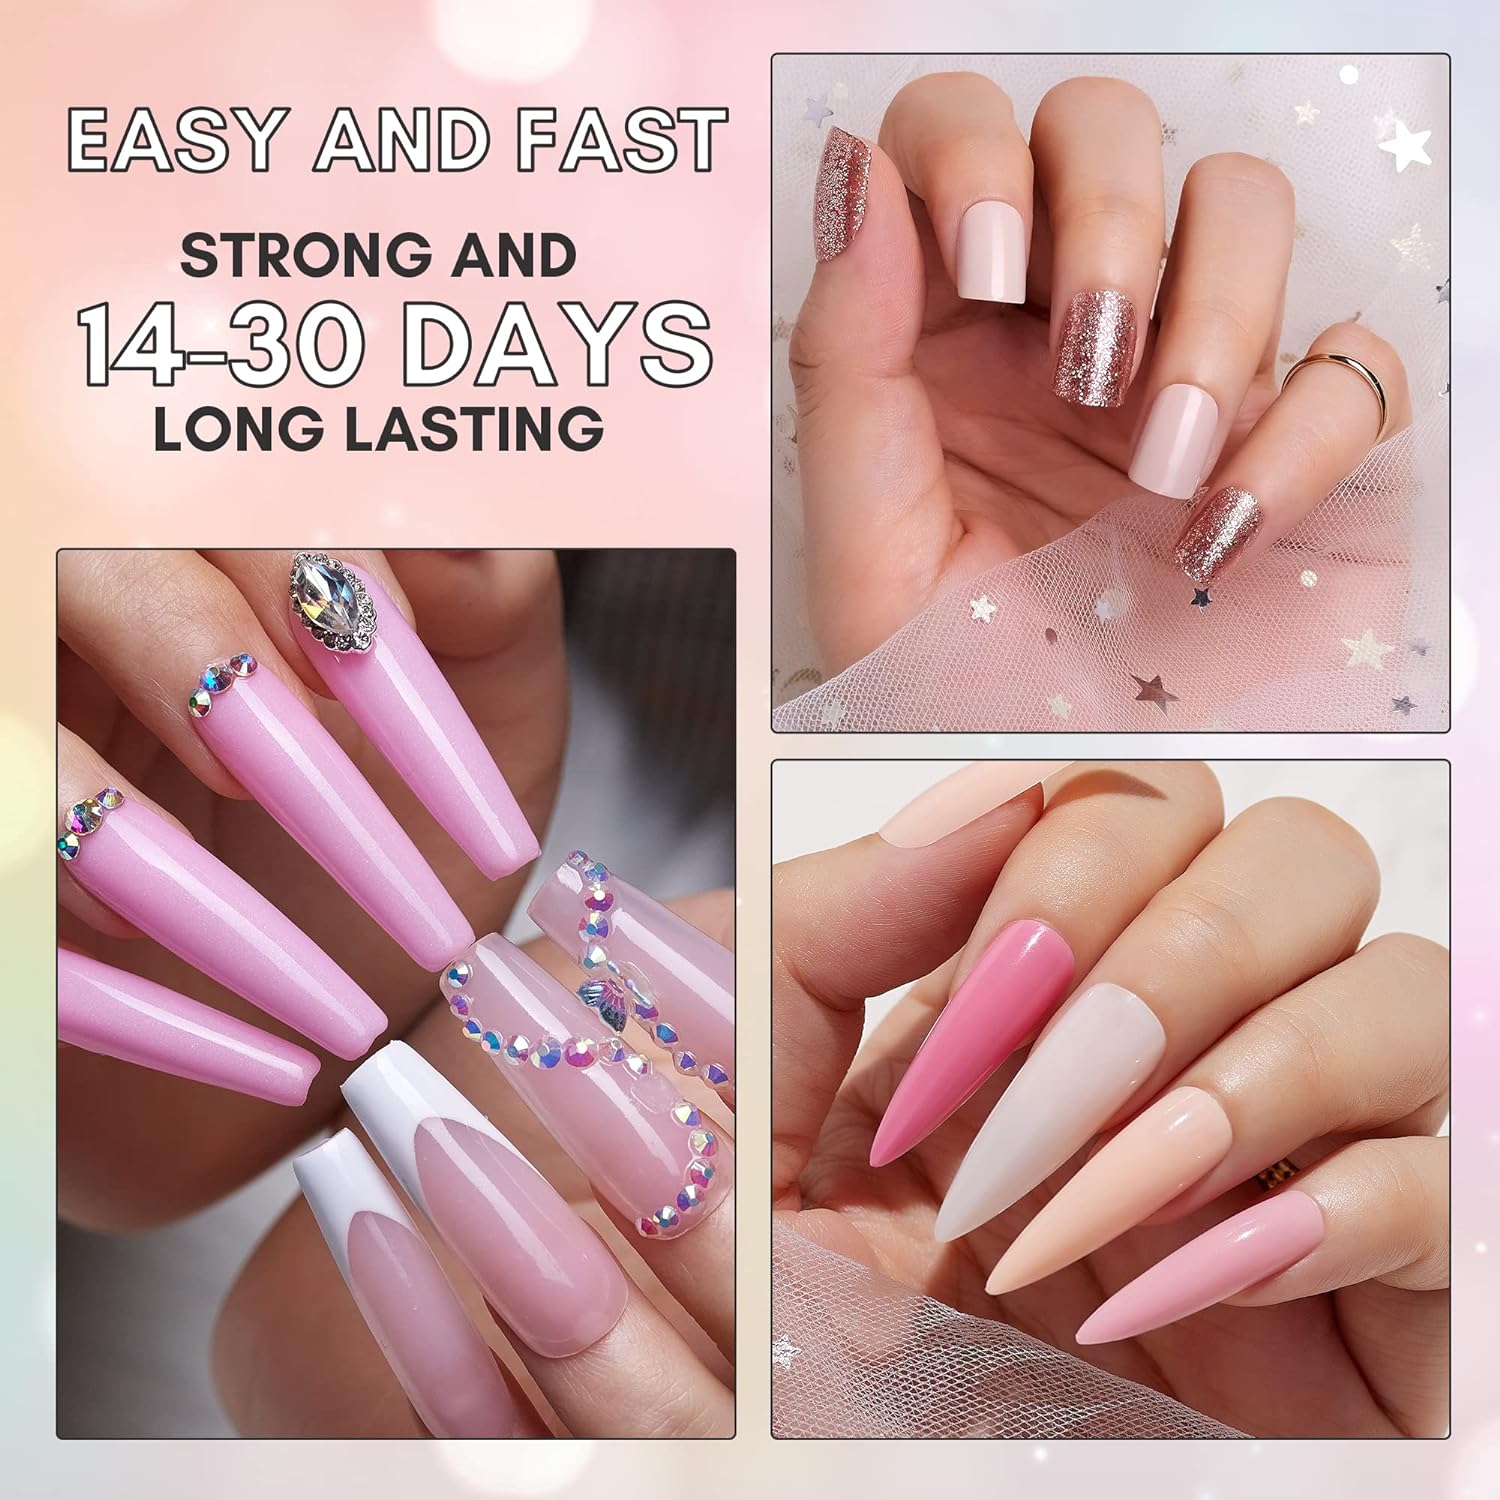 How to Do Acrylic Nails Step by Step - The tutorial ⋆ Elite Nails